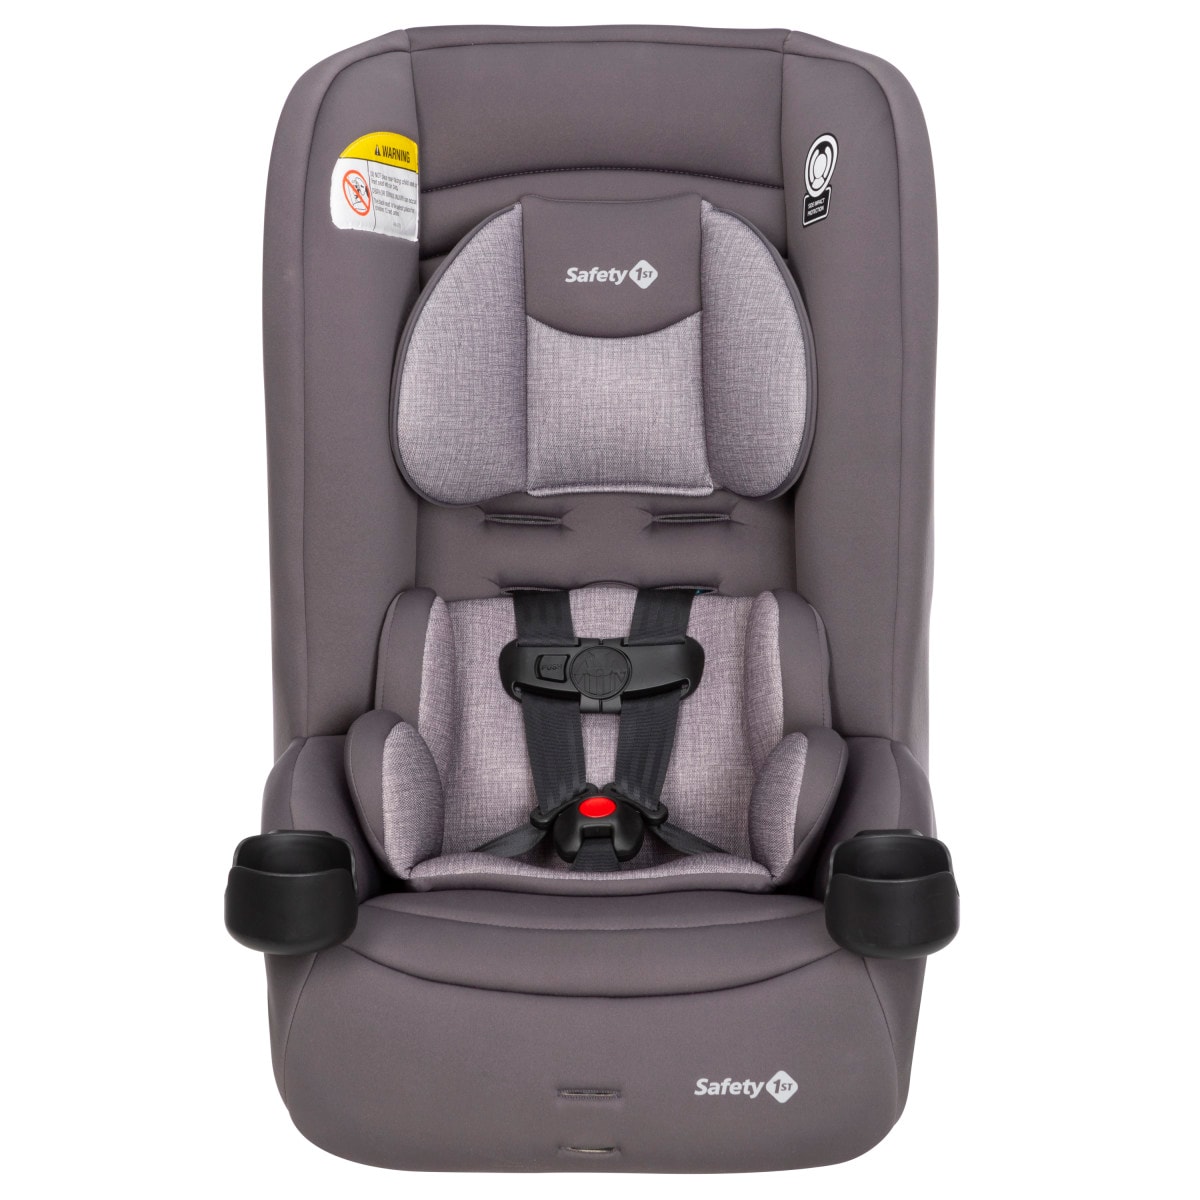 Overtuiging Zuiver Pedagogie Safety 1st Jive 2-in-1 Convertible Car Seat Gray Car Seat in the Child  Safety Accessories department at Lowes.com